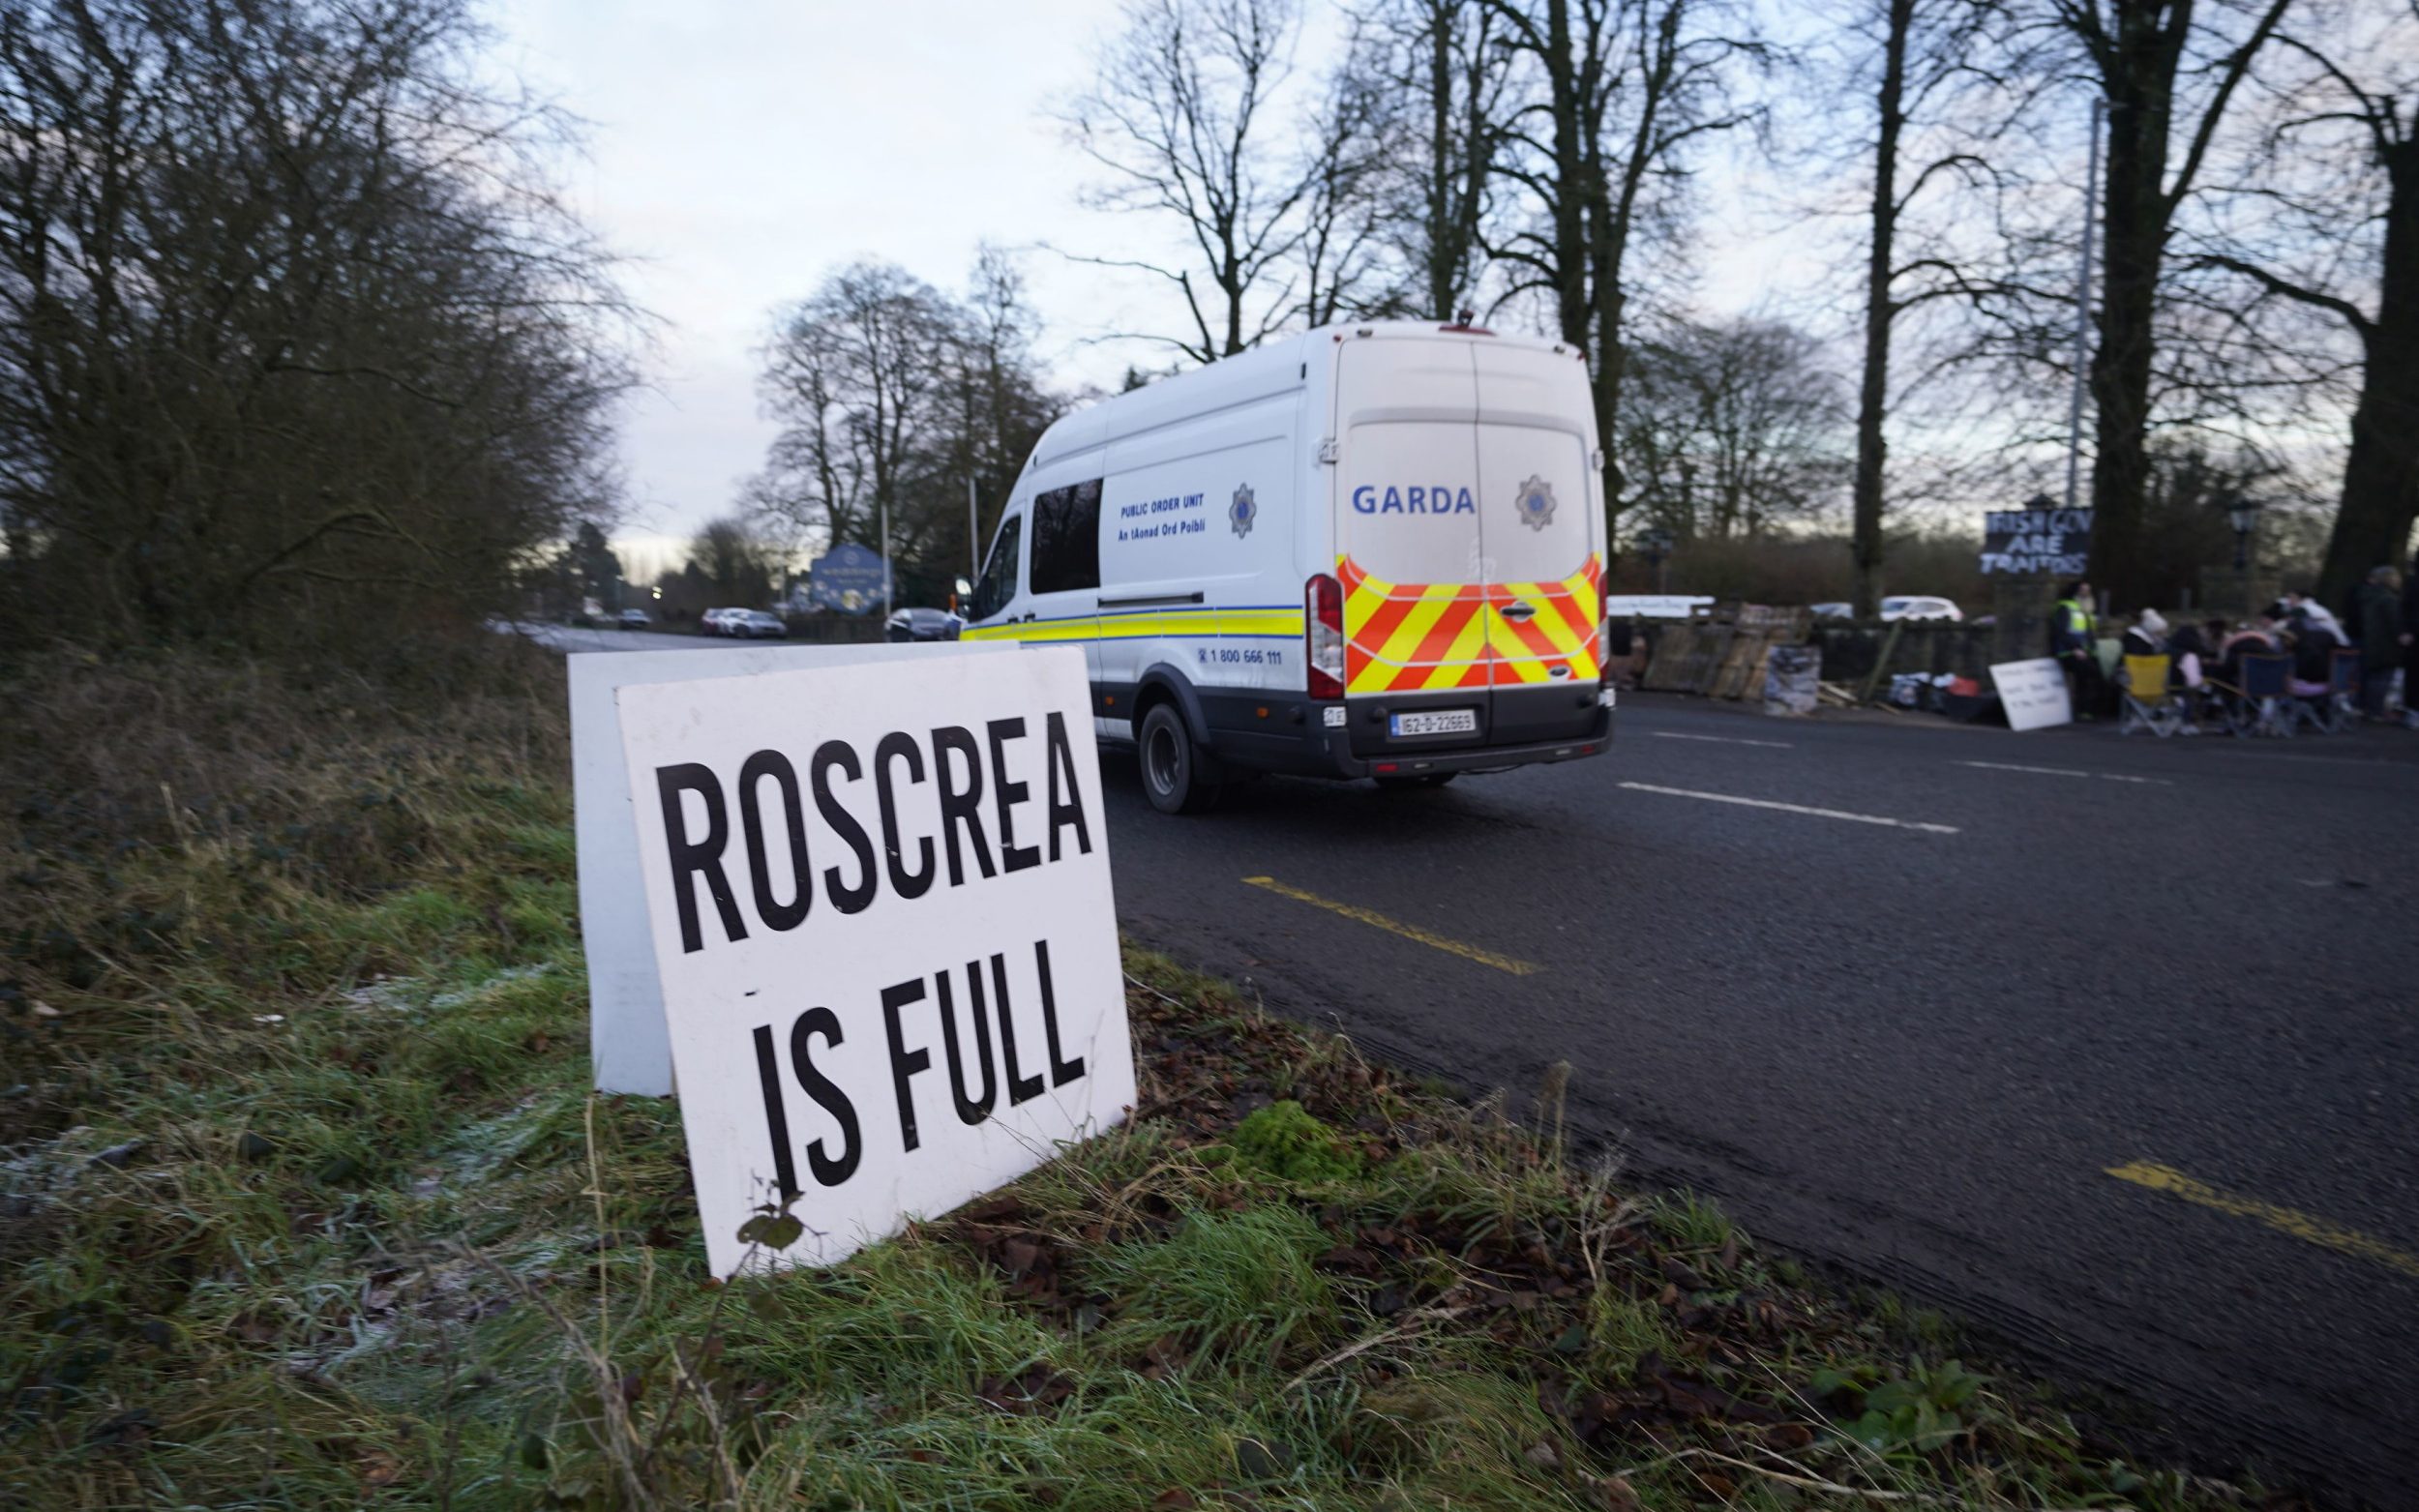 rural ireland revolts as town’s only hotel is closed to accommodate asylum seekers